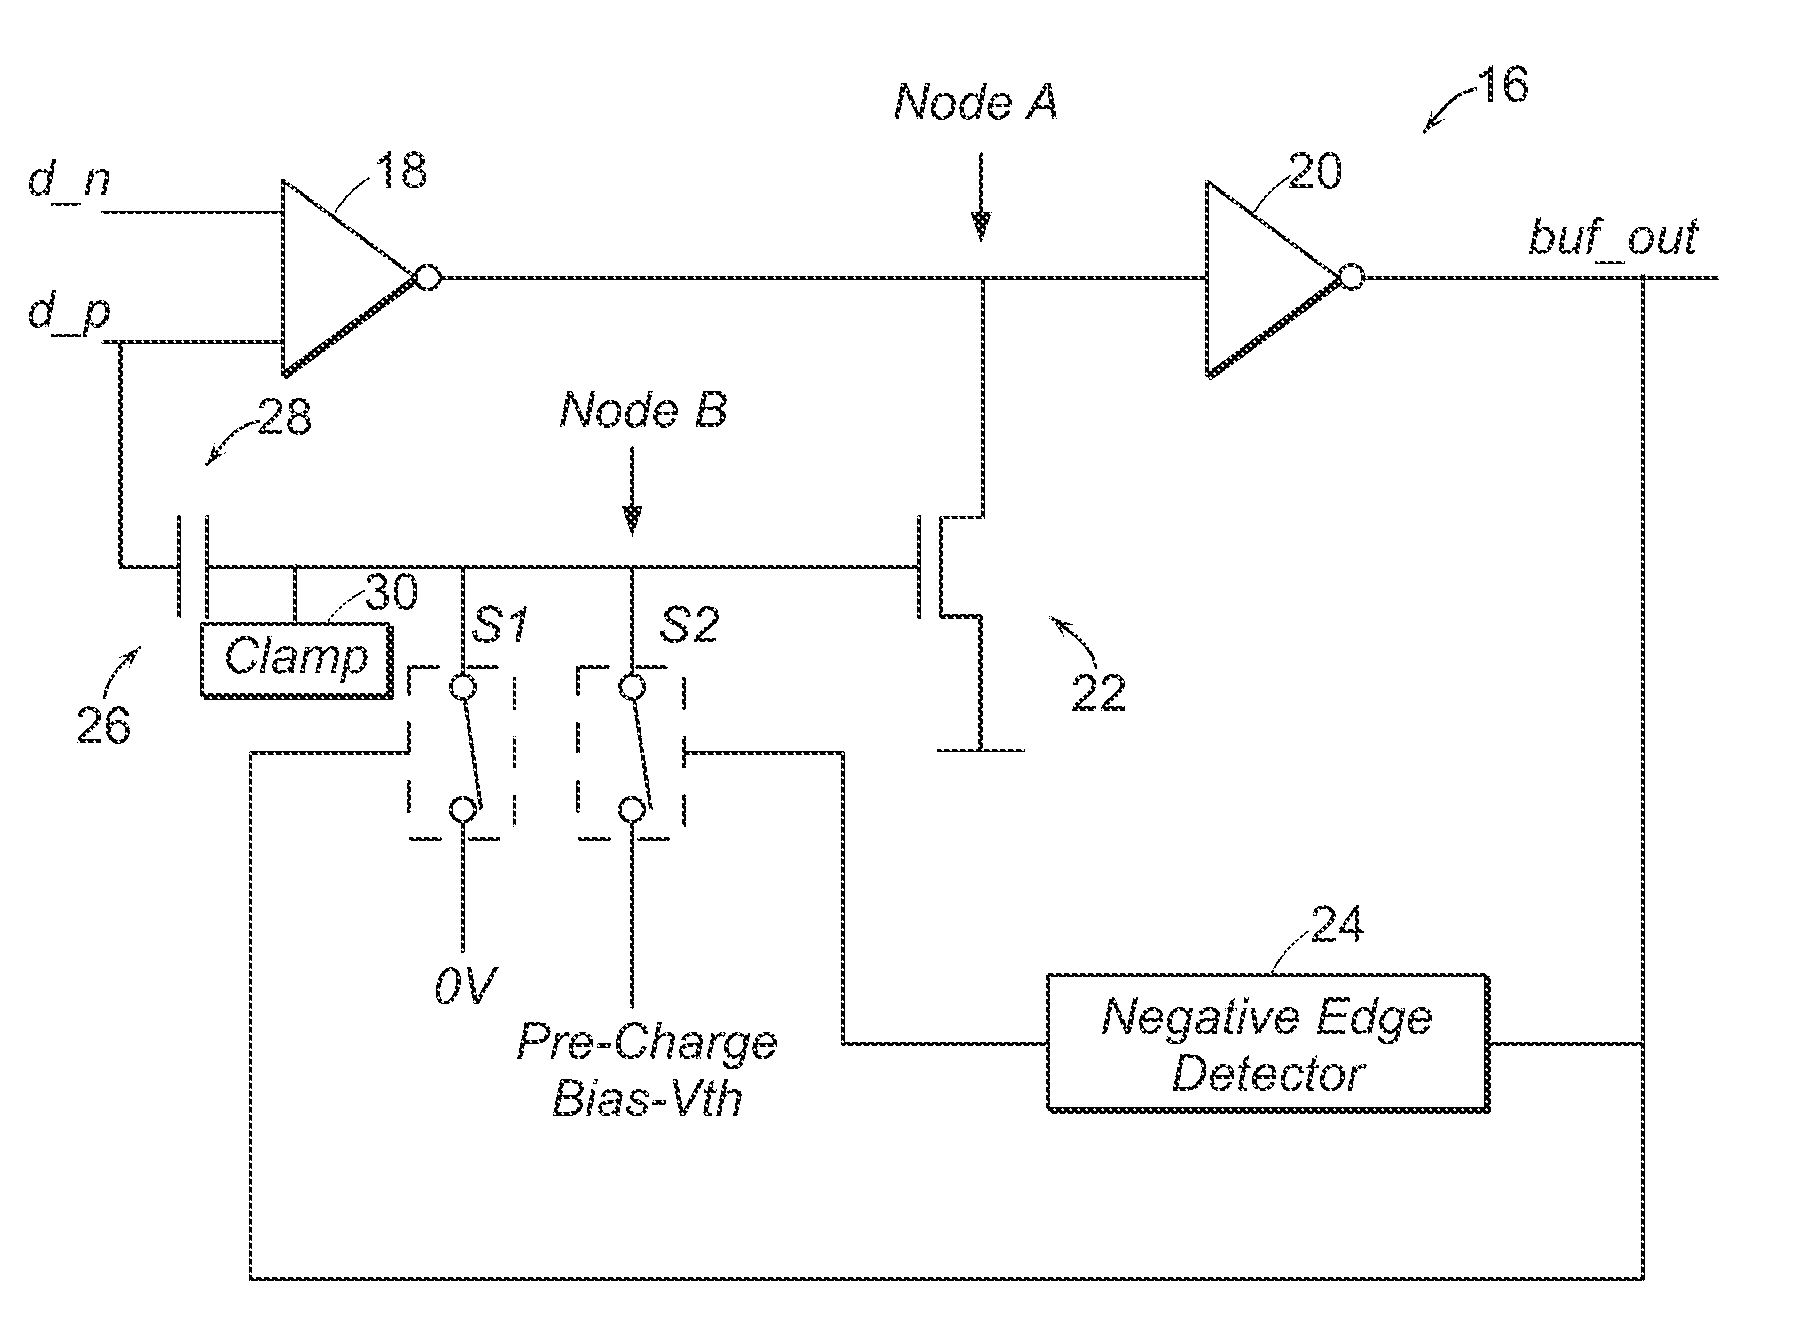 Capacitive feedforward circuit, system, and method to reduce buffer propagation delay